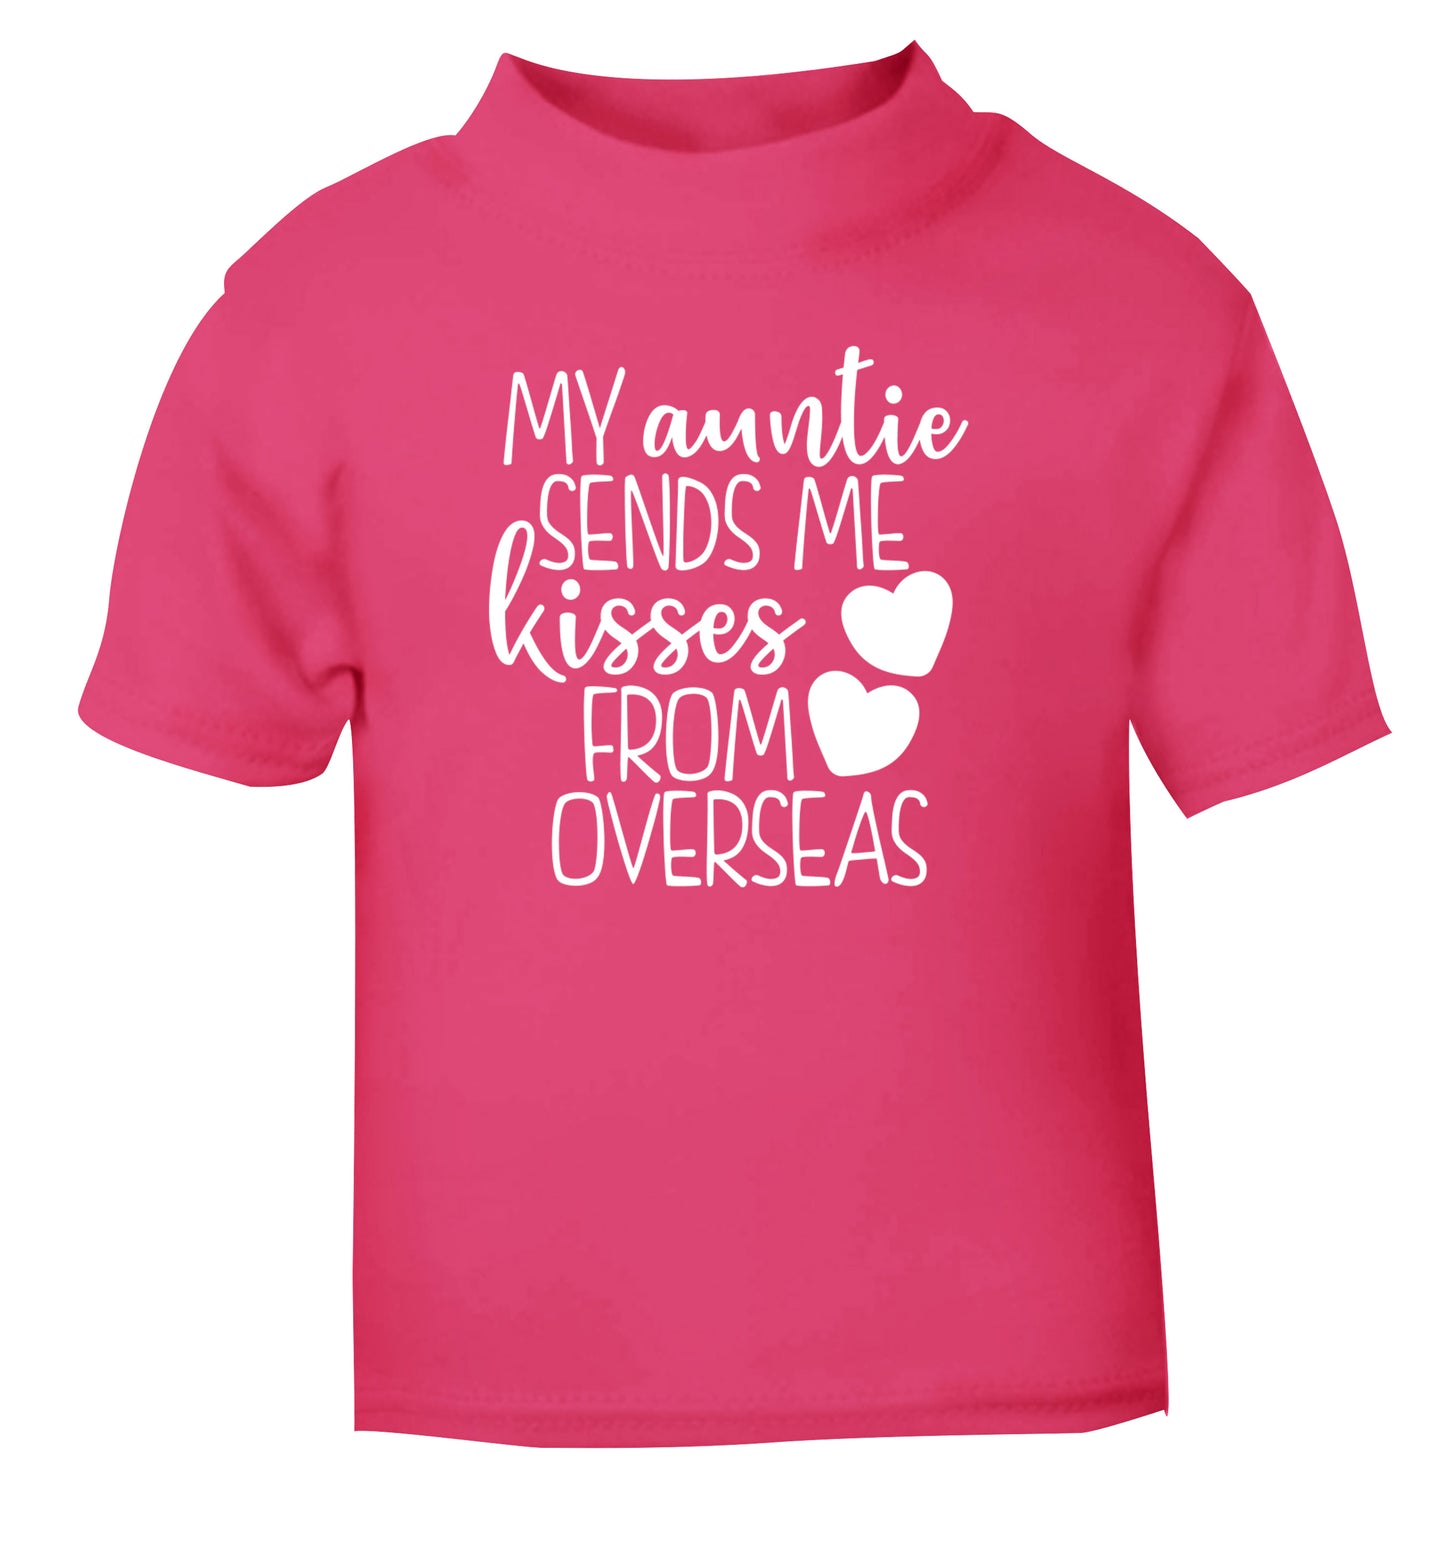 My auntie sends me kisses from overseas pink Baby Toddler Tshirt 2 Years